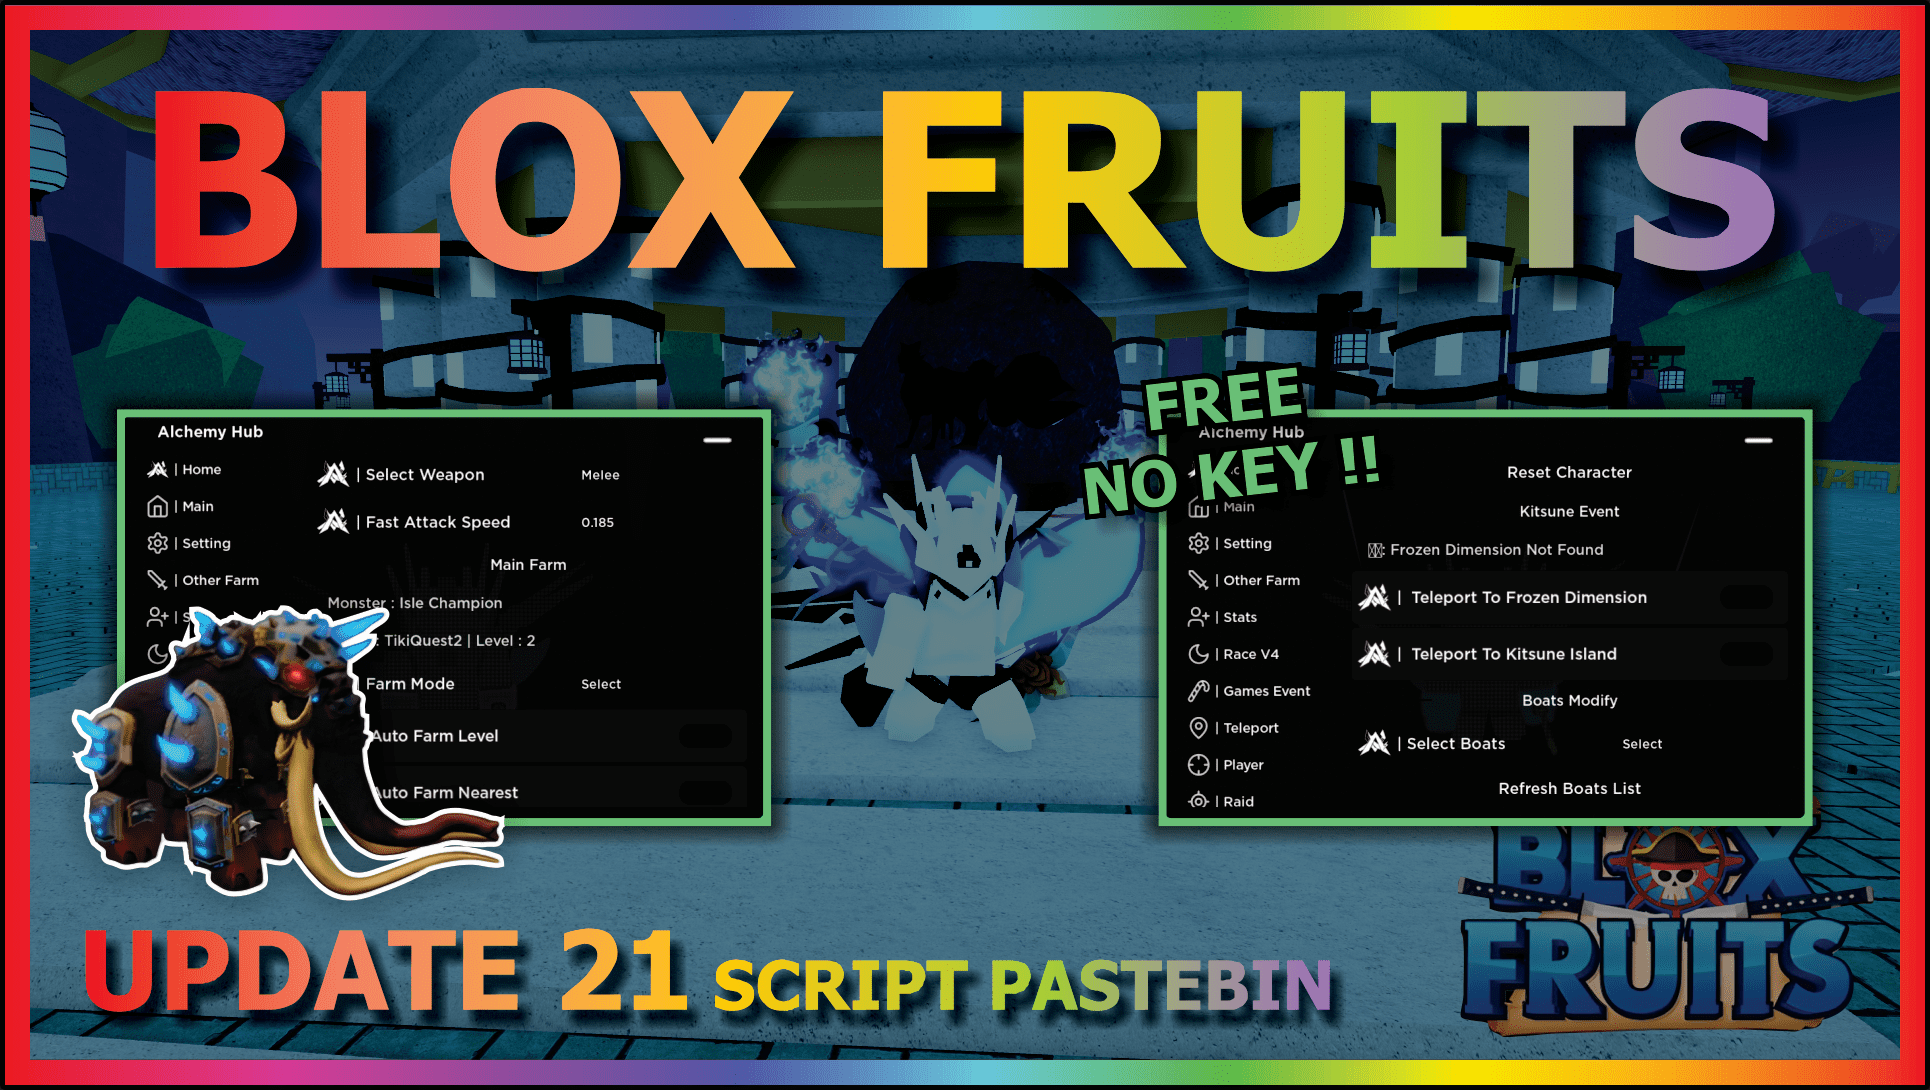 You are currently viewing BLOX FRUITS (ALCHEMY)